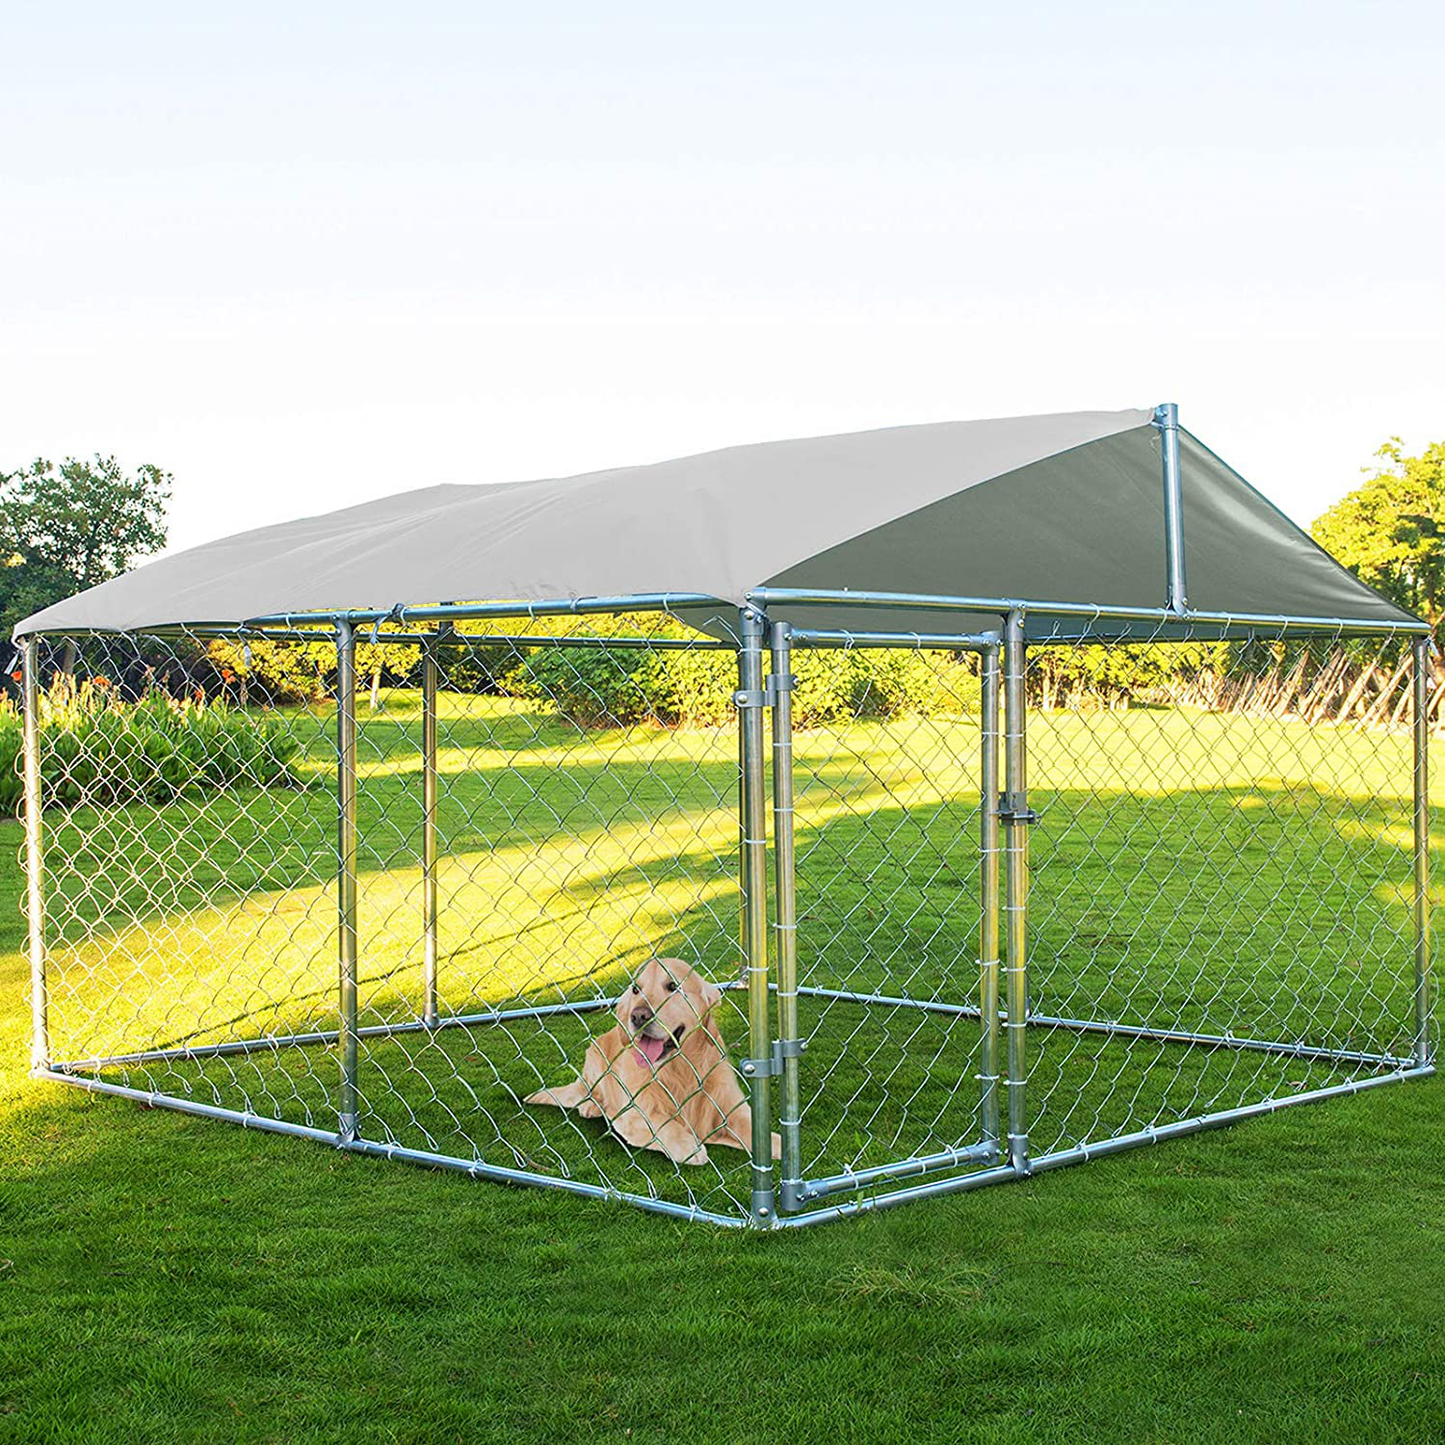 MAGIC UNION Dog Kennel Outdoor Metal Dog Cage outside Dog Fence Pet Enclosure Fencing with Water-Resistant Cover Roof Backyard Dog Run House (Basic)